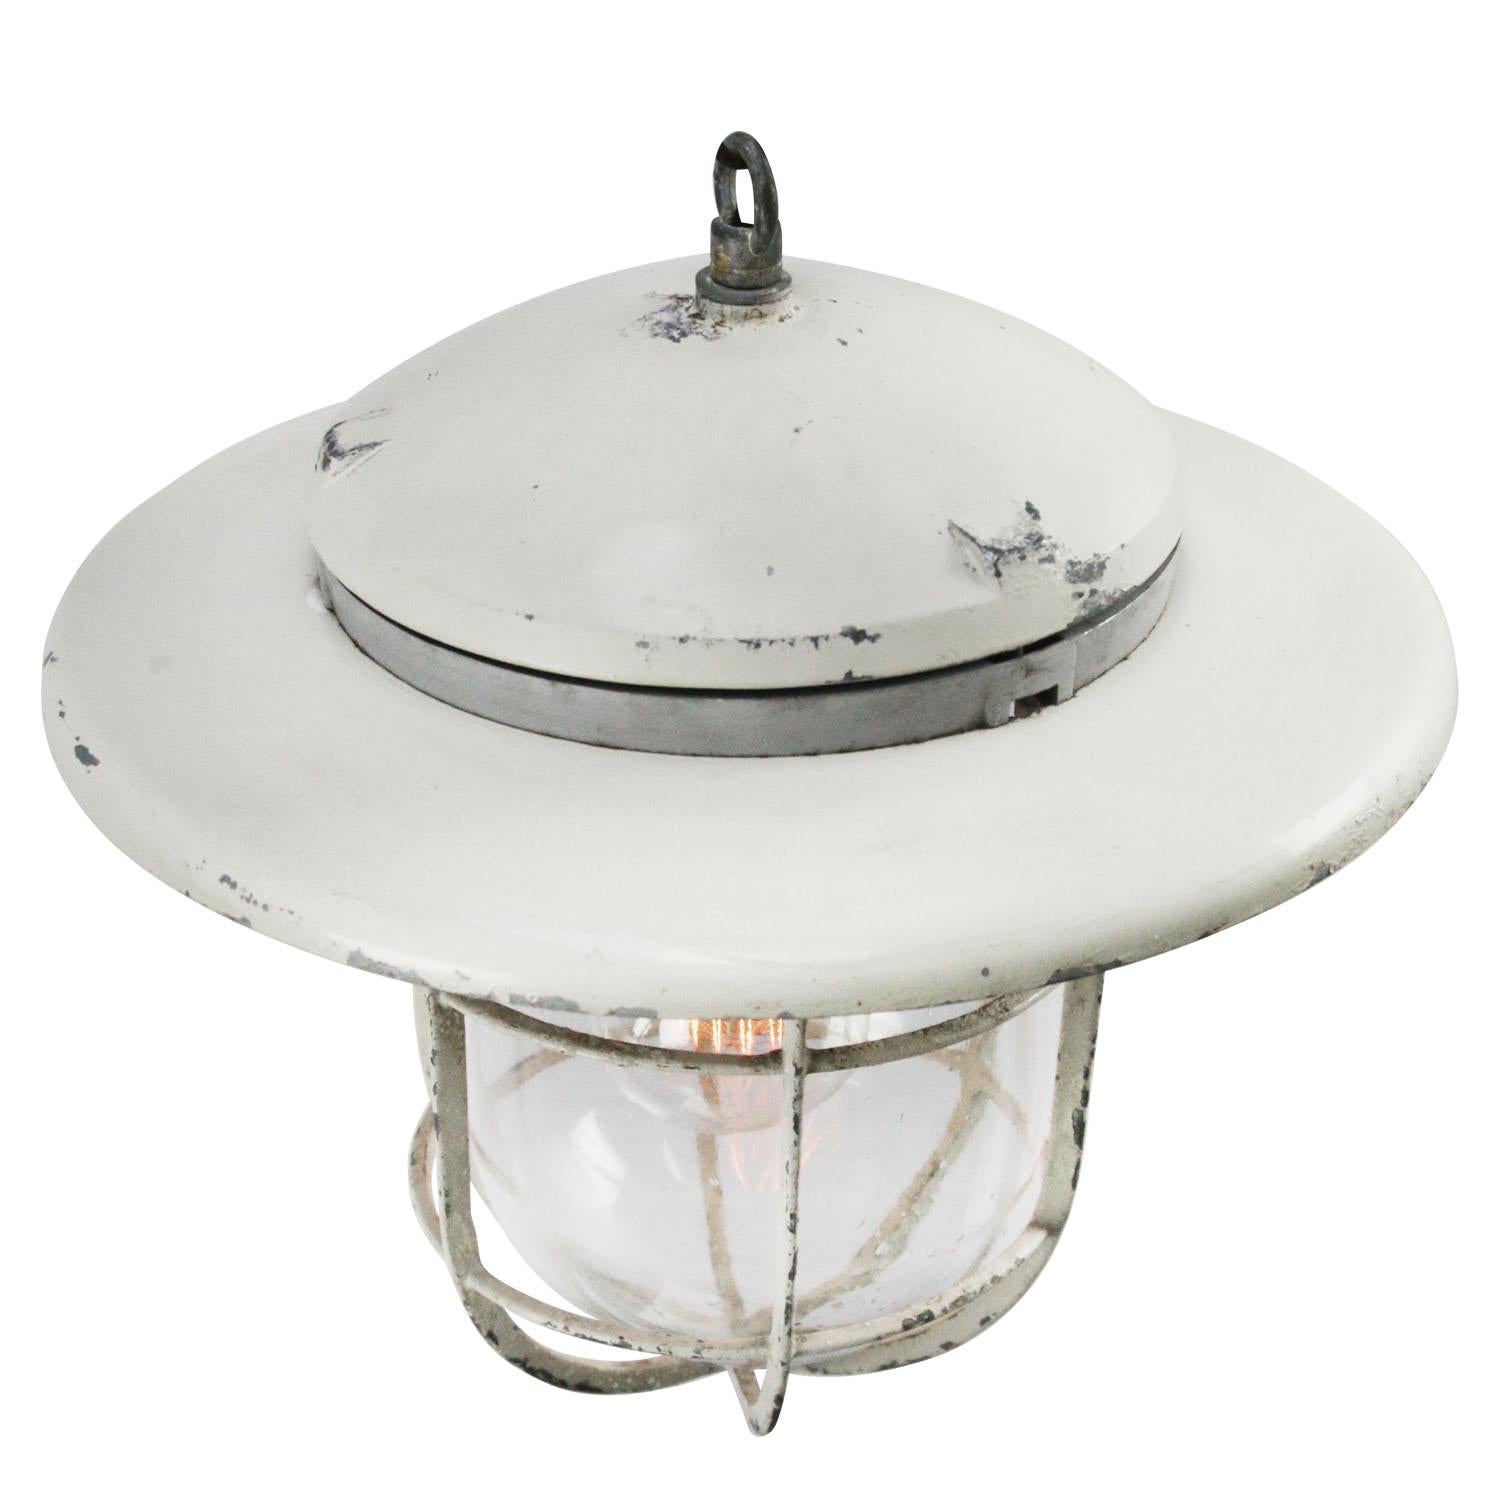 Industrial hanging lamp by Industria Rotterdam
Clear glass. white aluminium

Weight: 2.25 kg / 5 lb

Priced per individual item. All lamps have been made suitable by international standards for incandescent light bulbs, energy-efficient and LED